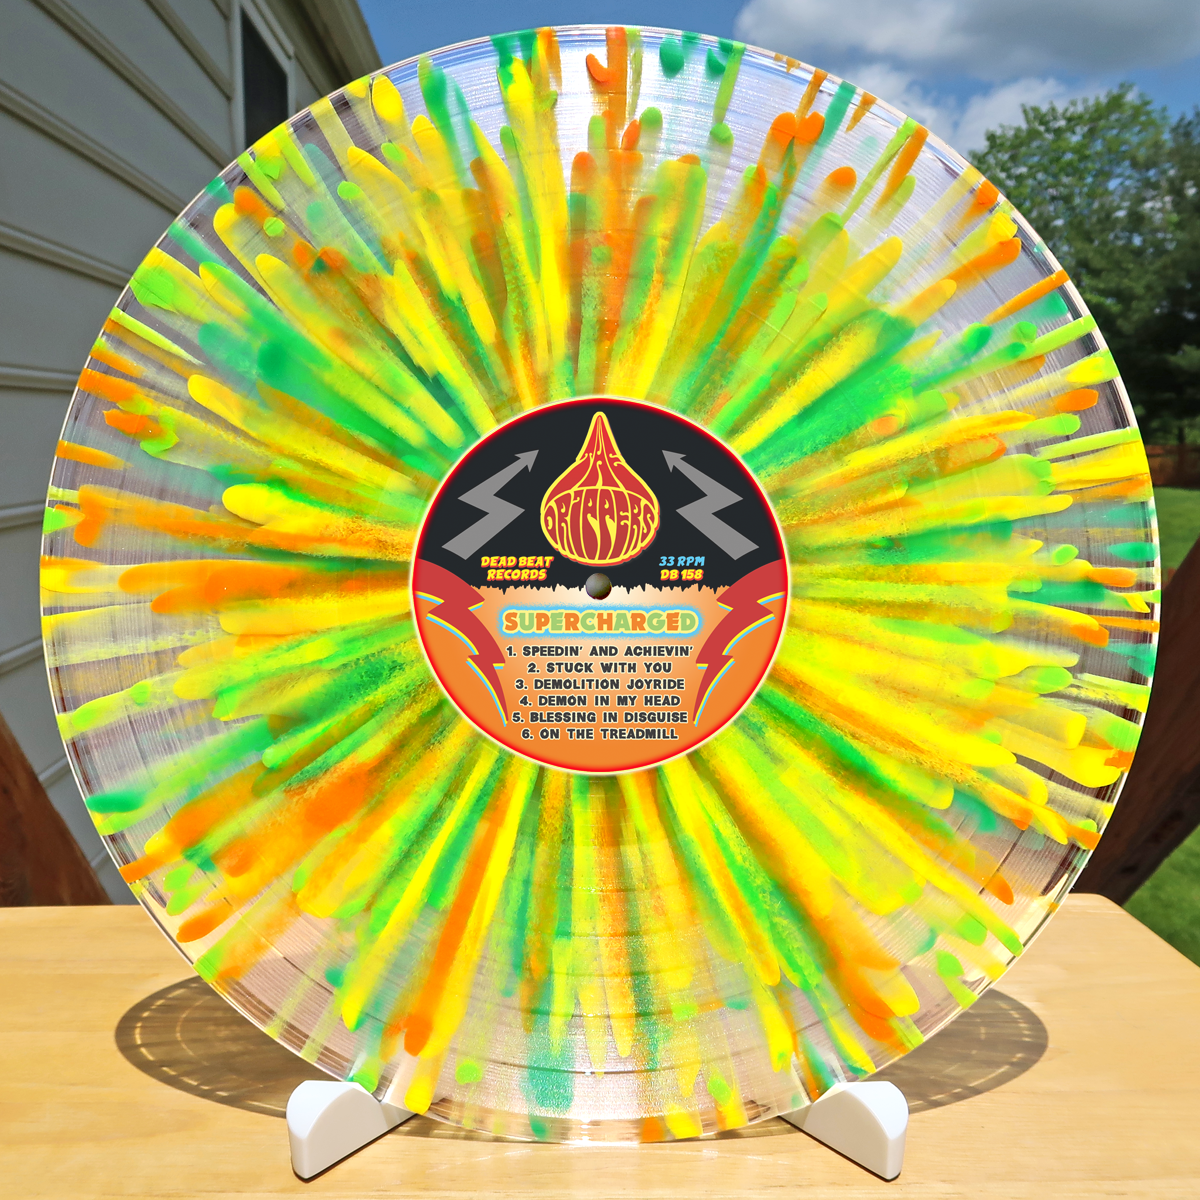 Electric Frankenstein / The Drippers-  'Supercharged' Split LP ~GOLD BUNDLE LTD TO 50 W/ EF PIN, DRIPPERS PIN + SPLAT WAX!